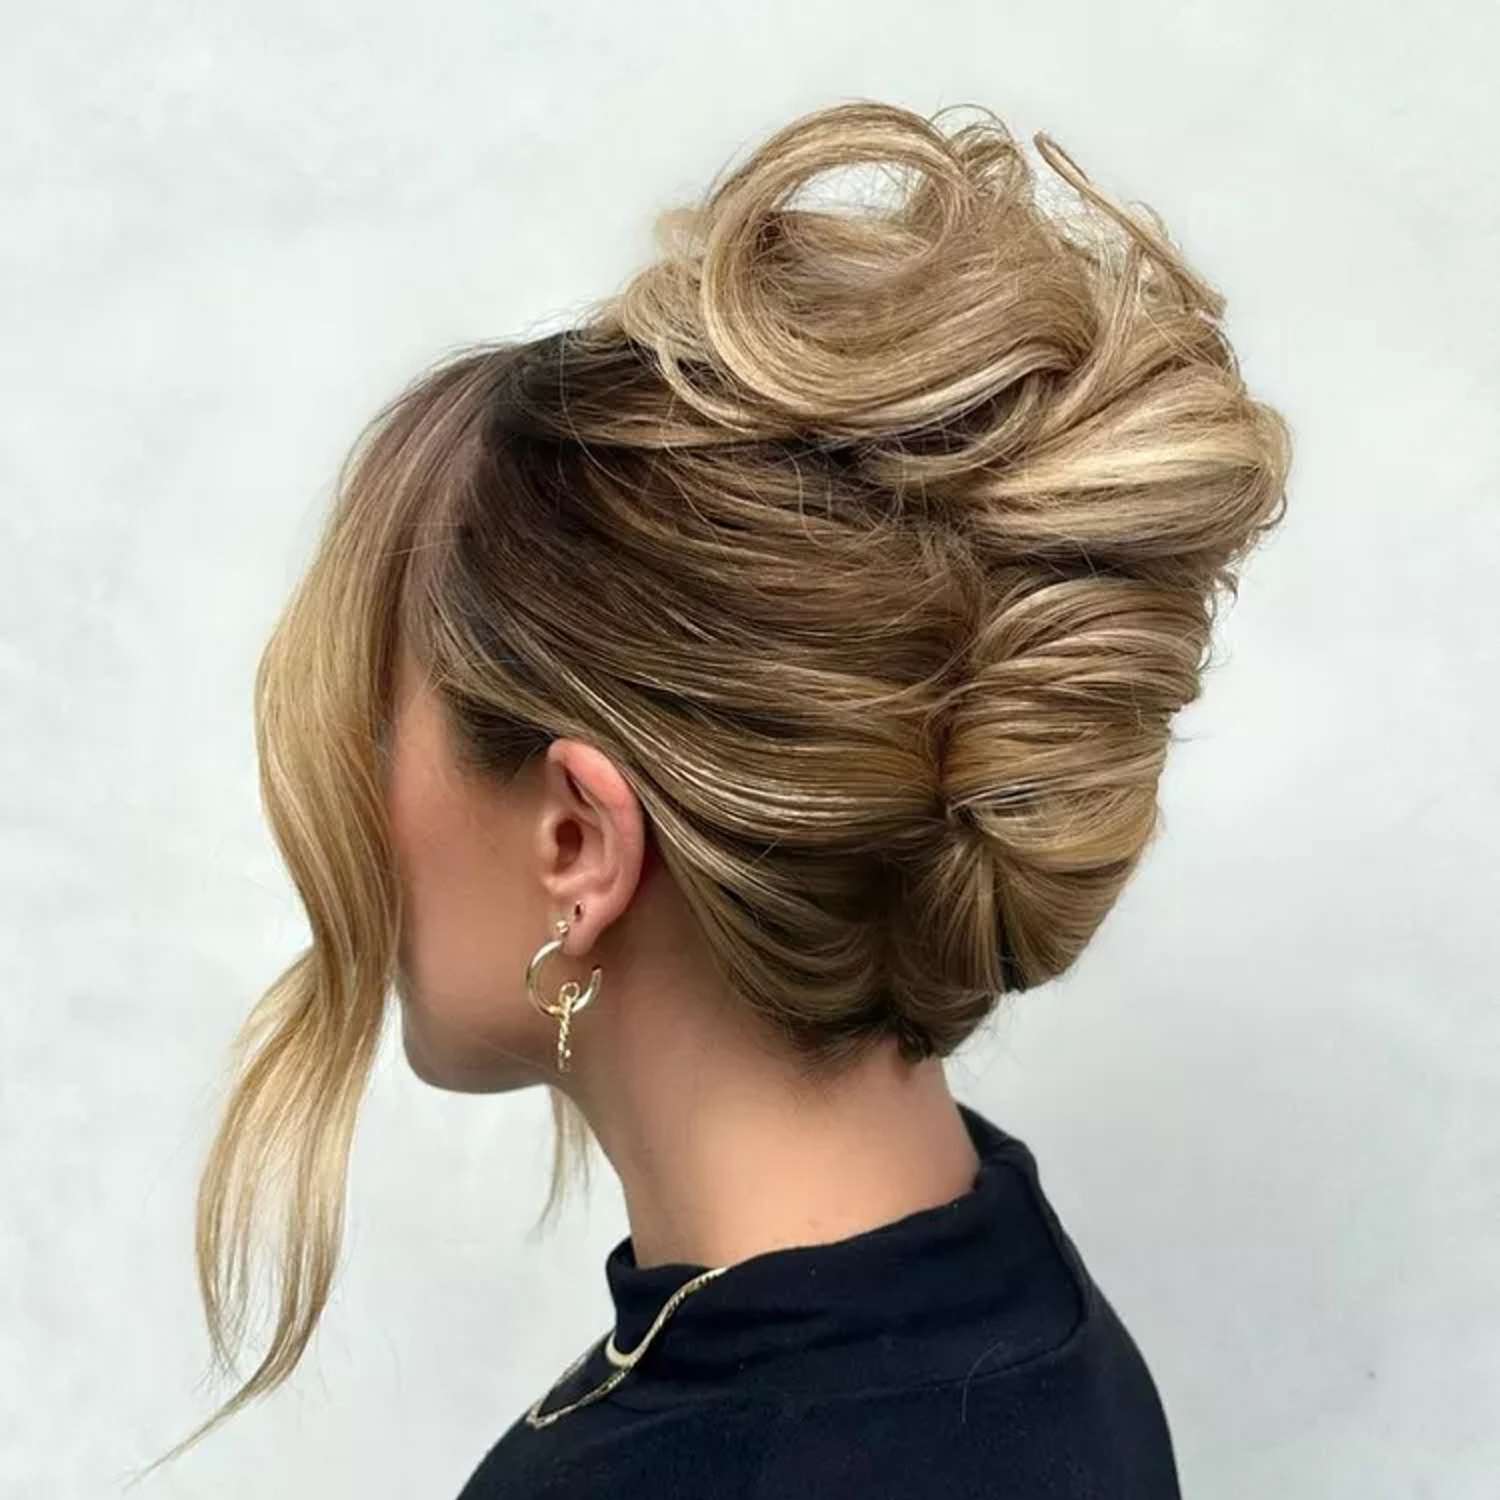 24 Quick and Easy Mom Hairstyles for Every Hair Length